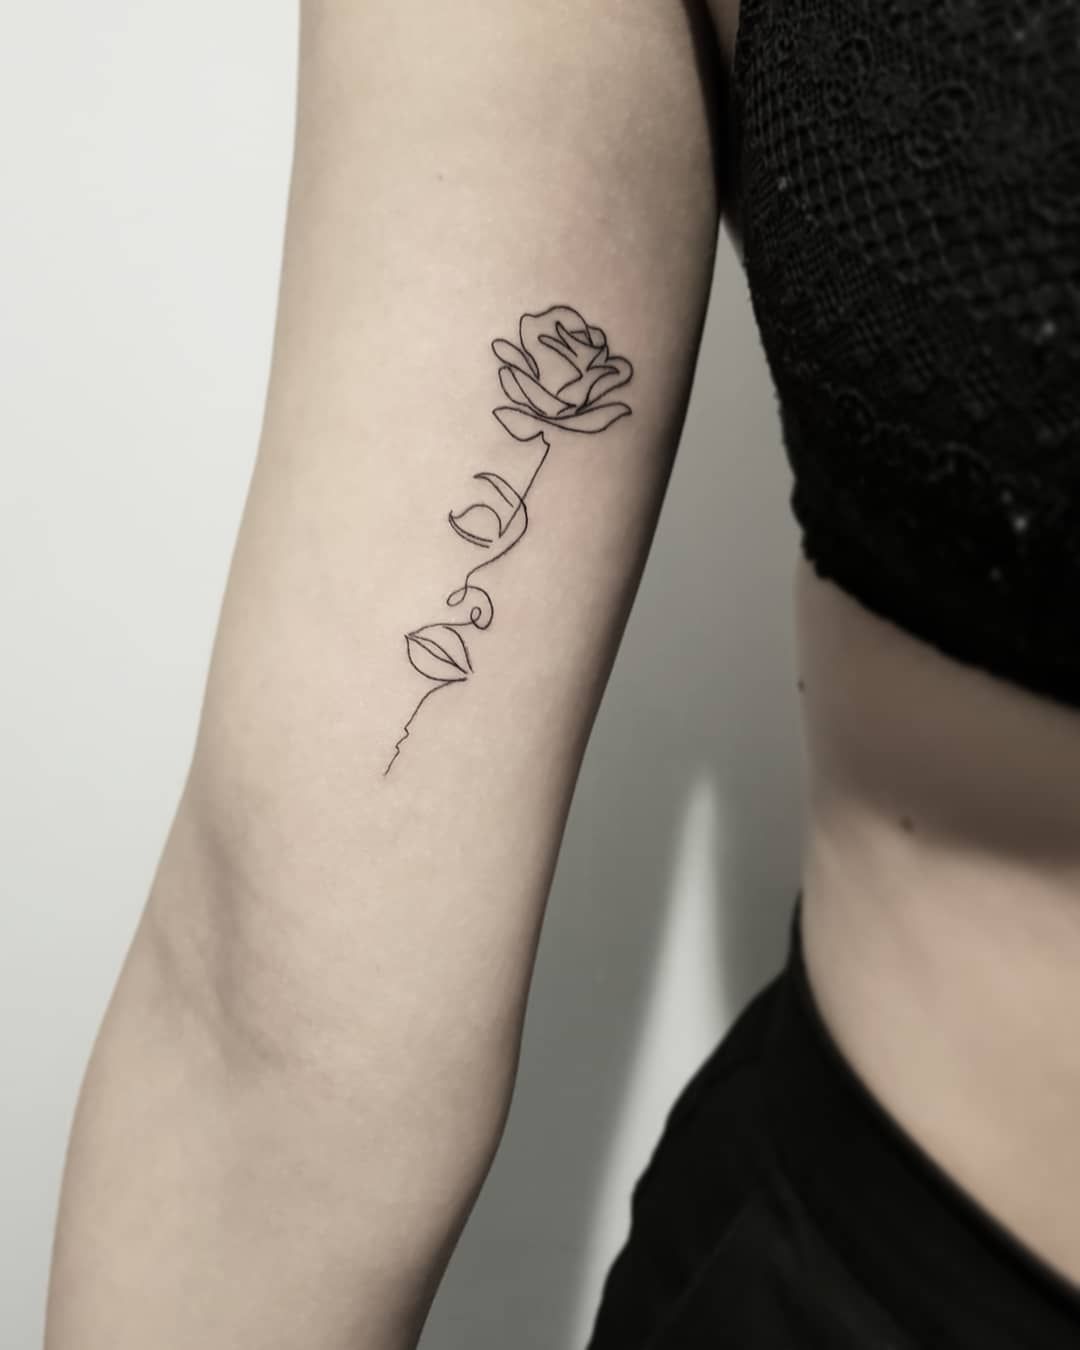 One Line Tattoos 34 Continuous Line Tattoos That Are as Beautiful as They Are Simple Continuous line tattoo Tattoos Line tattoos